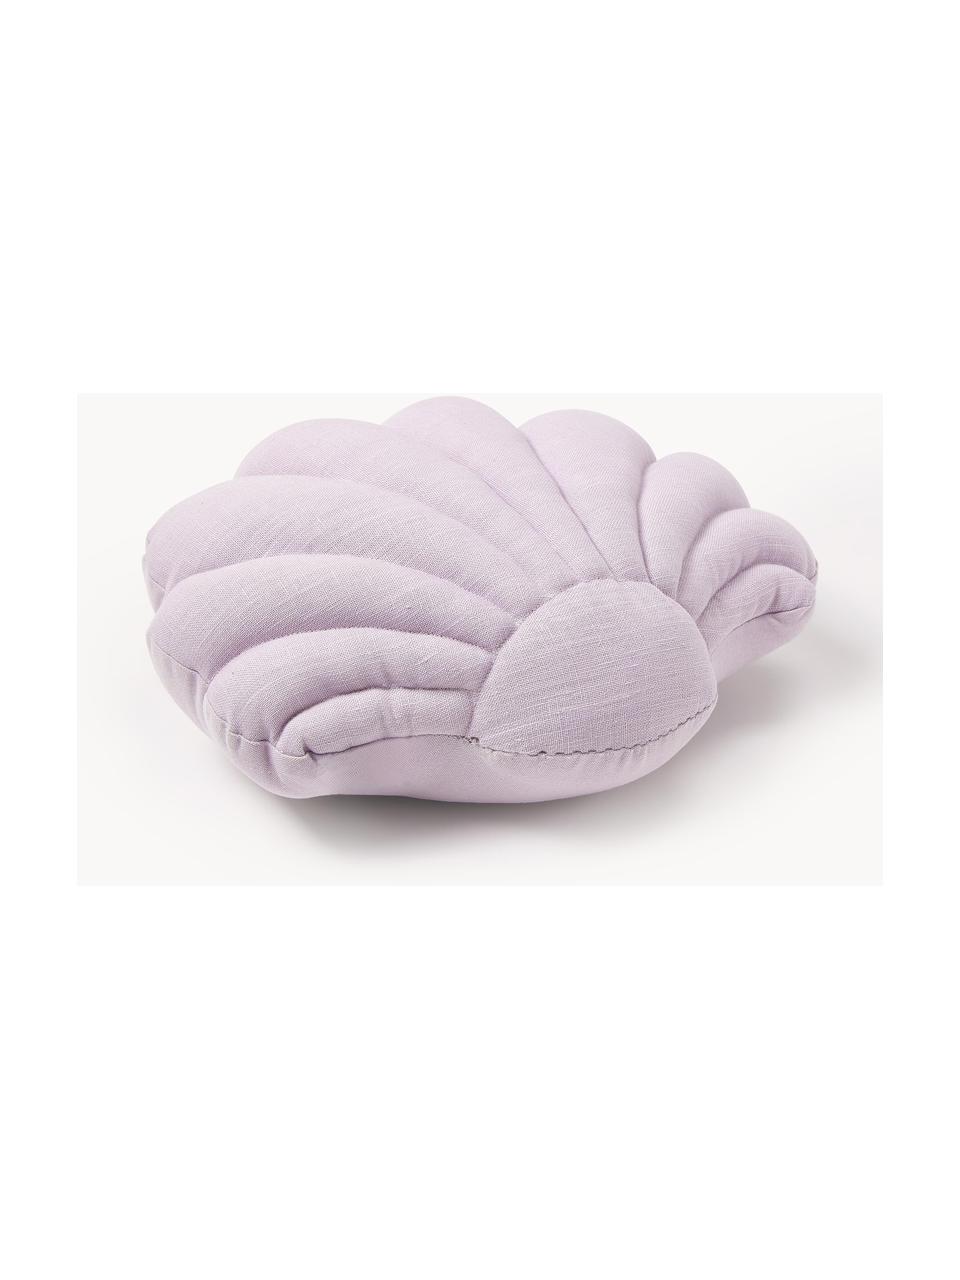 Coussin coquillage en lin Shell, Lilas, larg. 34 x long. 38 cm